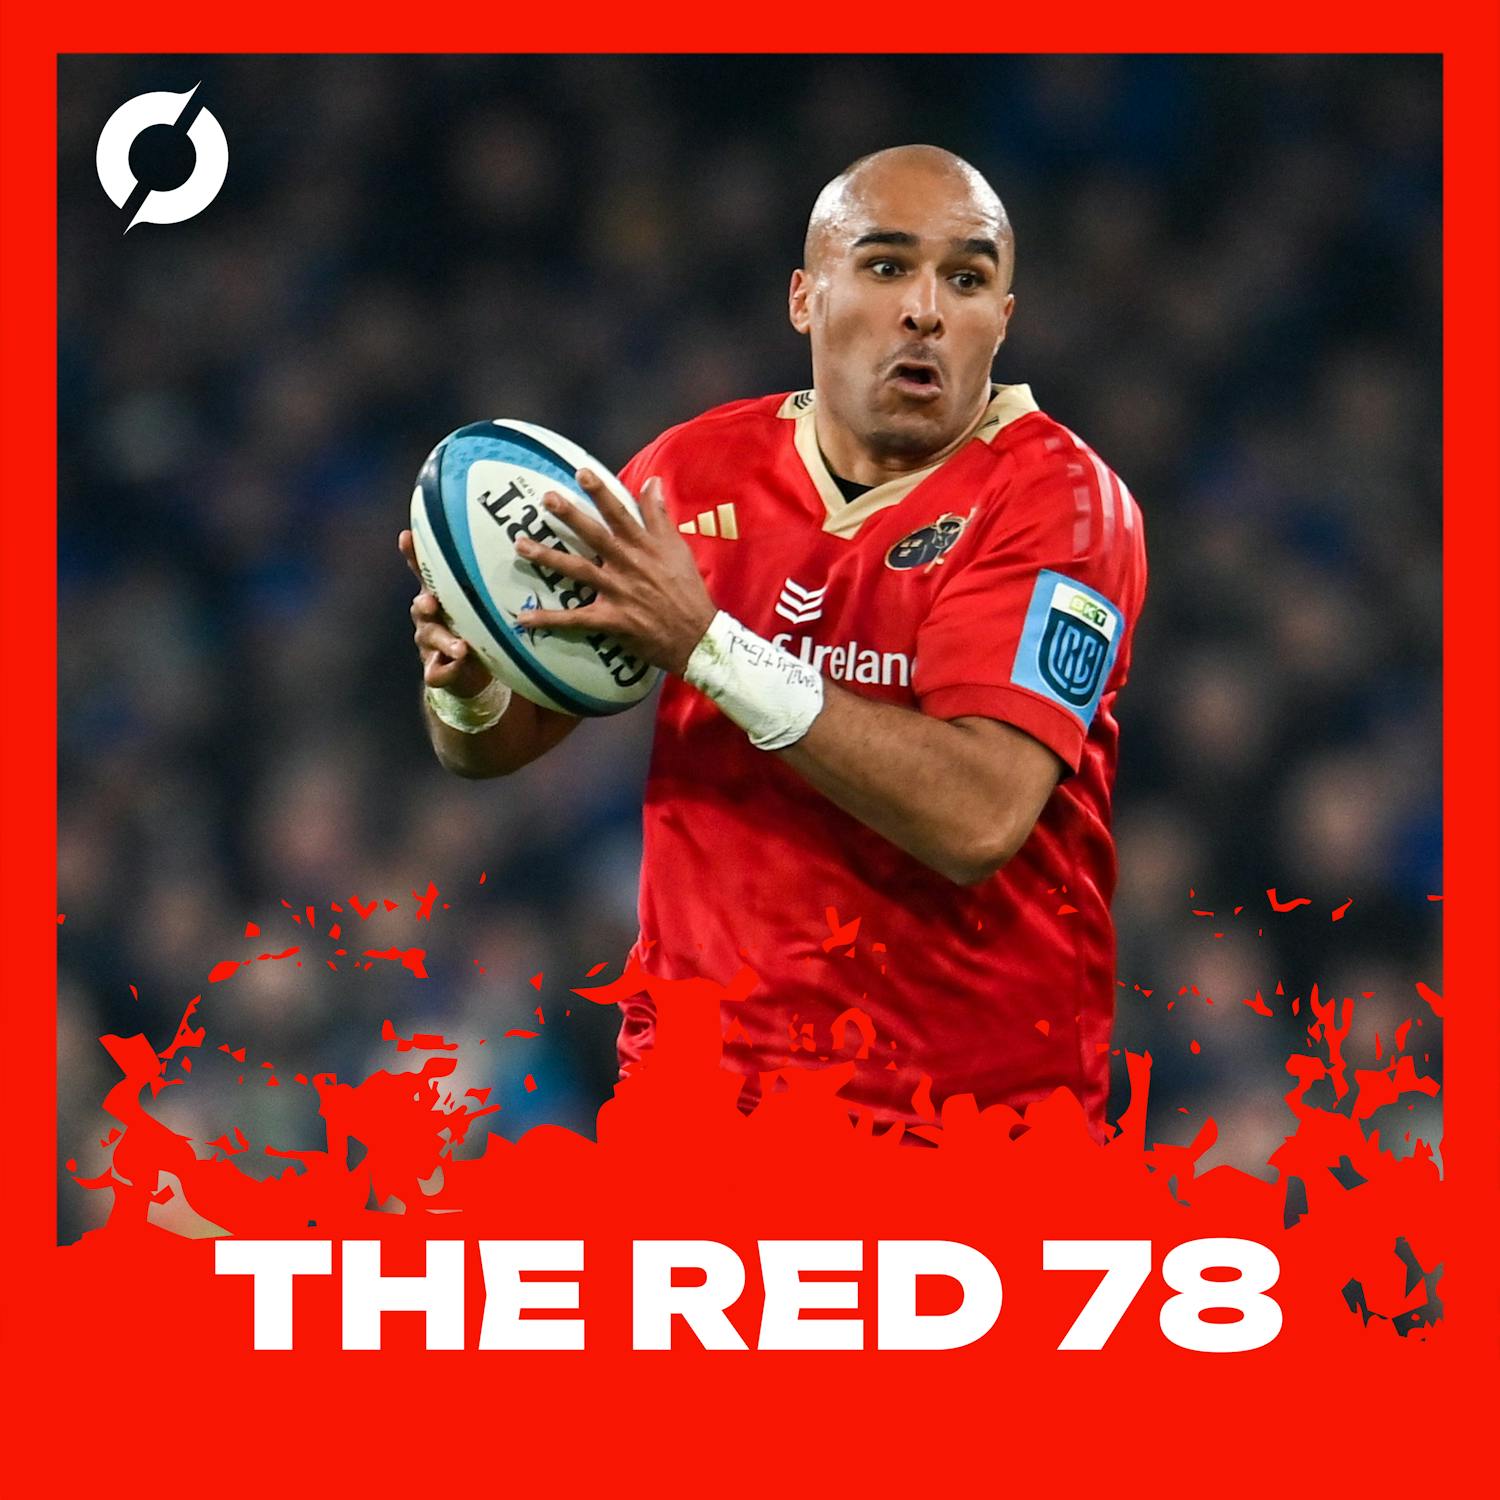 The Red 78 Unlocked: Positive performance at the Aviva, new contracts and O’Mahony stands down as skipper - Ep. 78